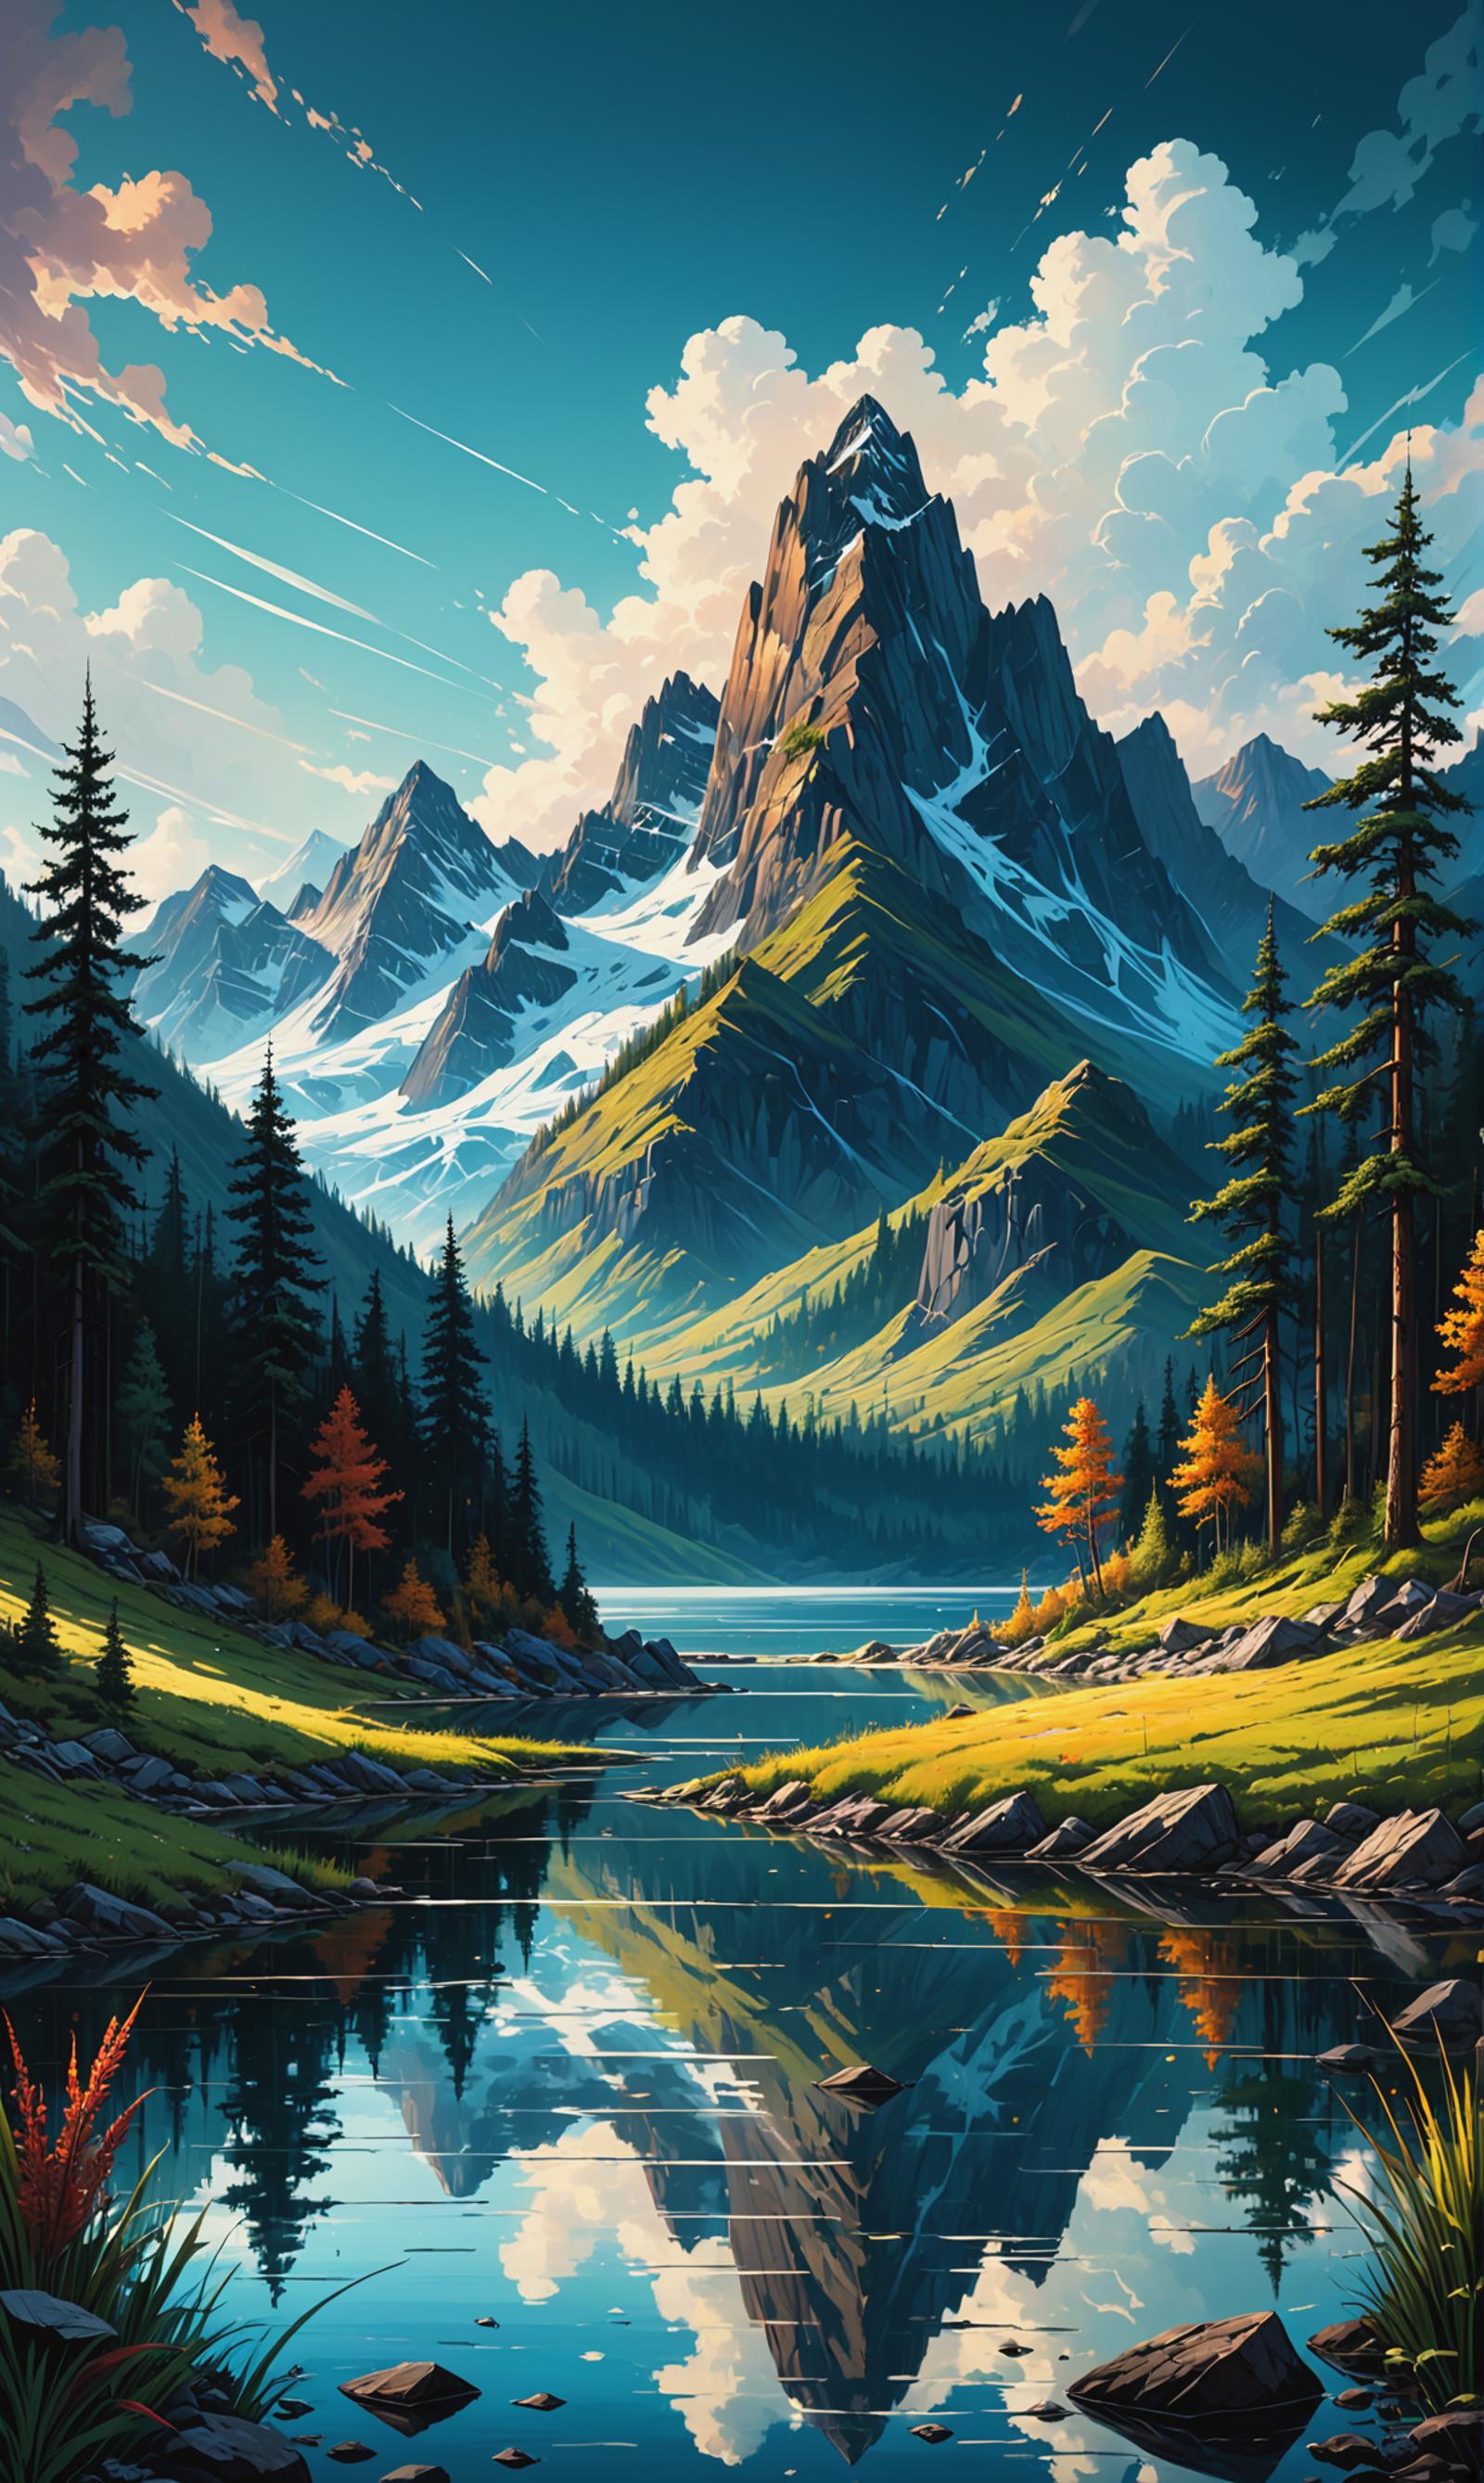 Artistic Landscape Painting of a Mountain Lake with Trees and River